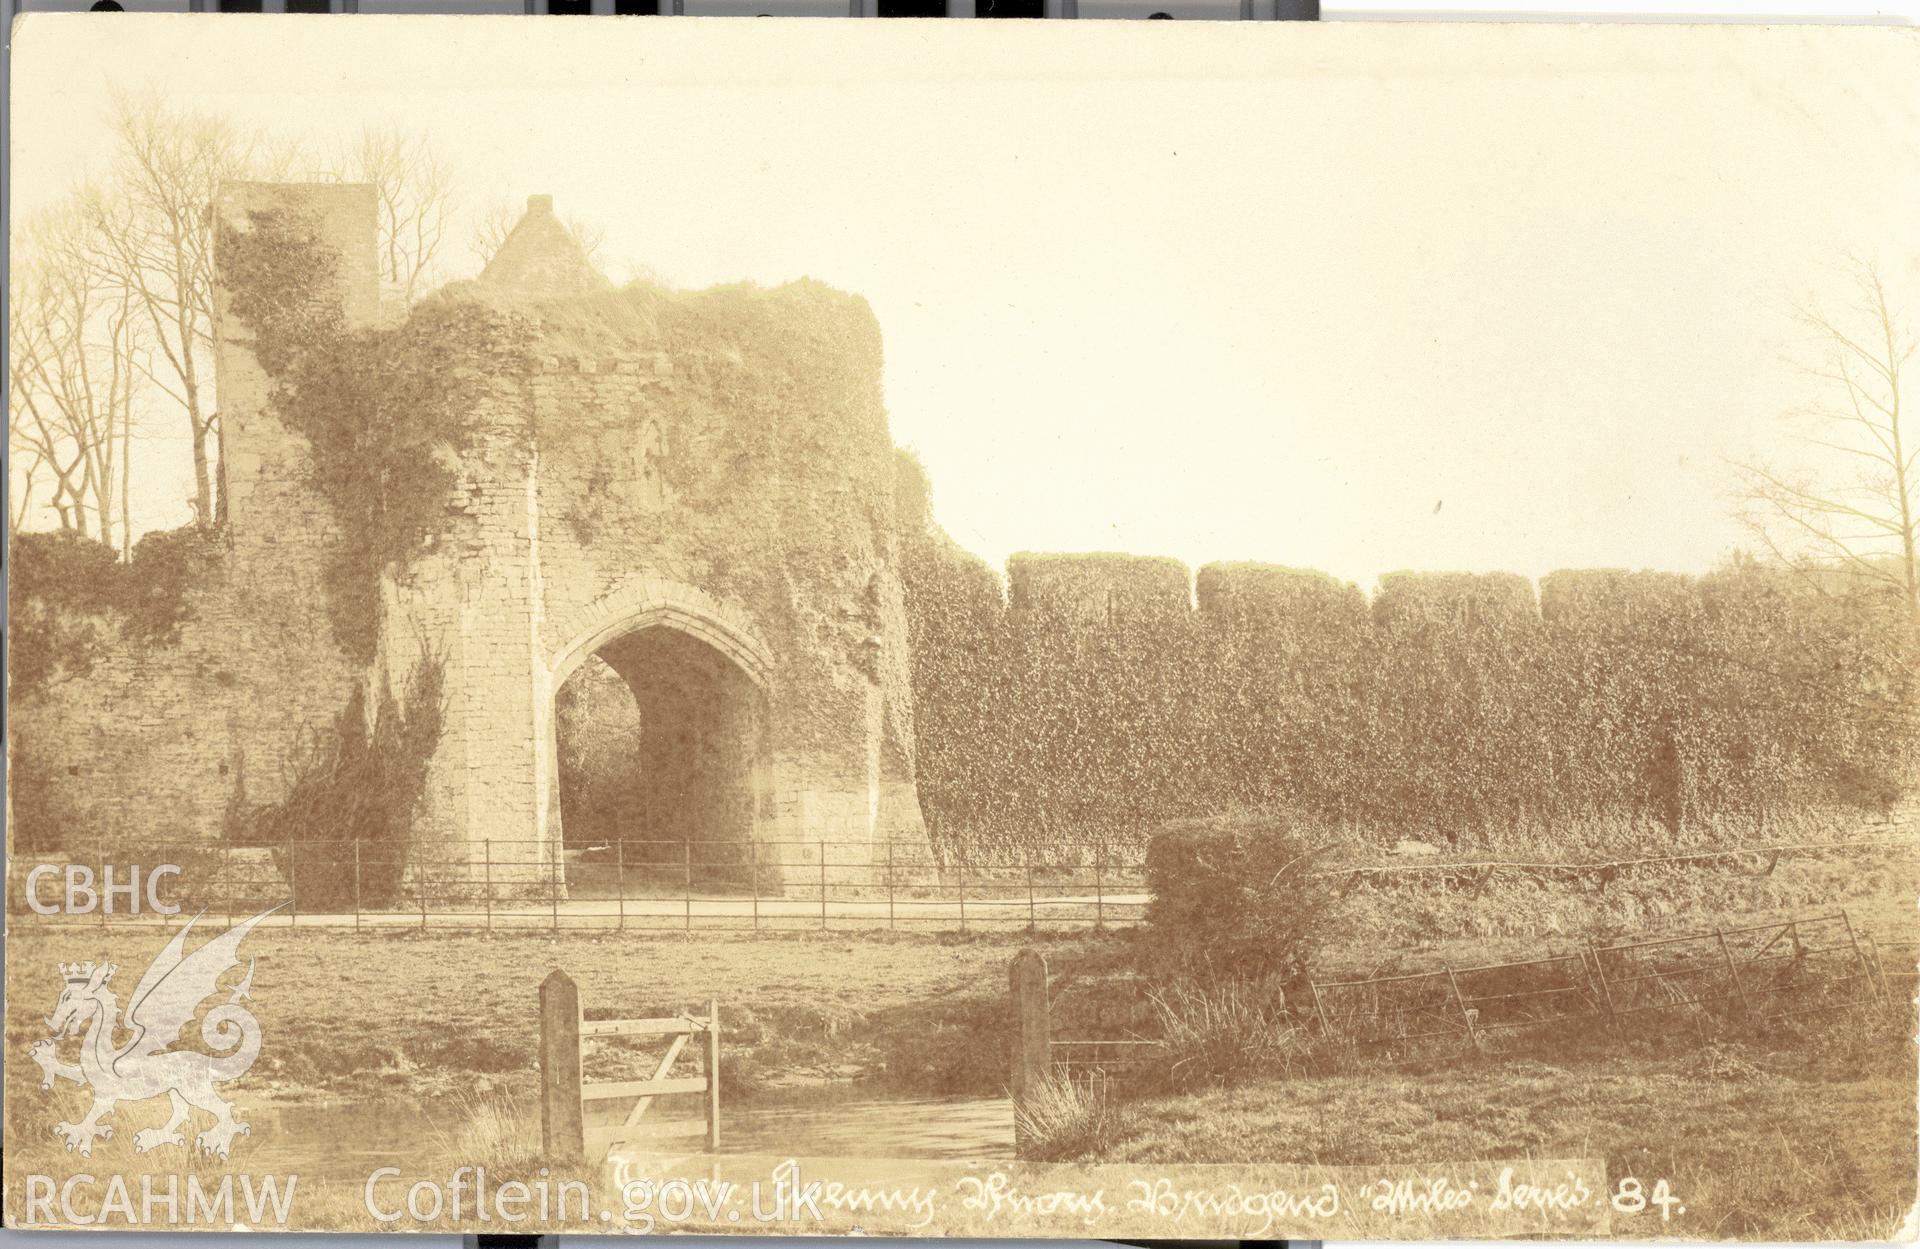 Digitised postcard image of precinct walls, Ewenny Priory, the Miles Series, Ewenny Road Studio, Bridgend. Produced by Parks and Gardens Data Services, from an original item in the Peter Davis Collection at Parks and Gardens UK. We hold only web-resolution images of this collection, suitable for viewing on screen and for research purposes only. We do not hold the original images, or publication quality scans.